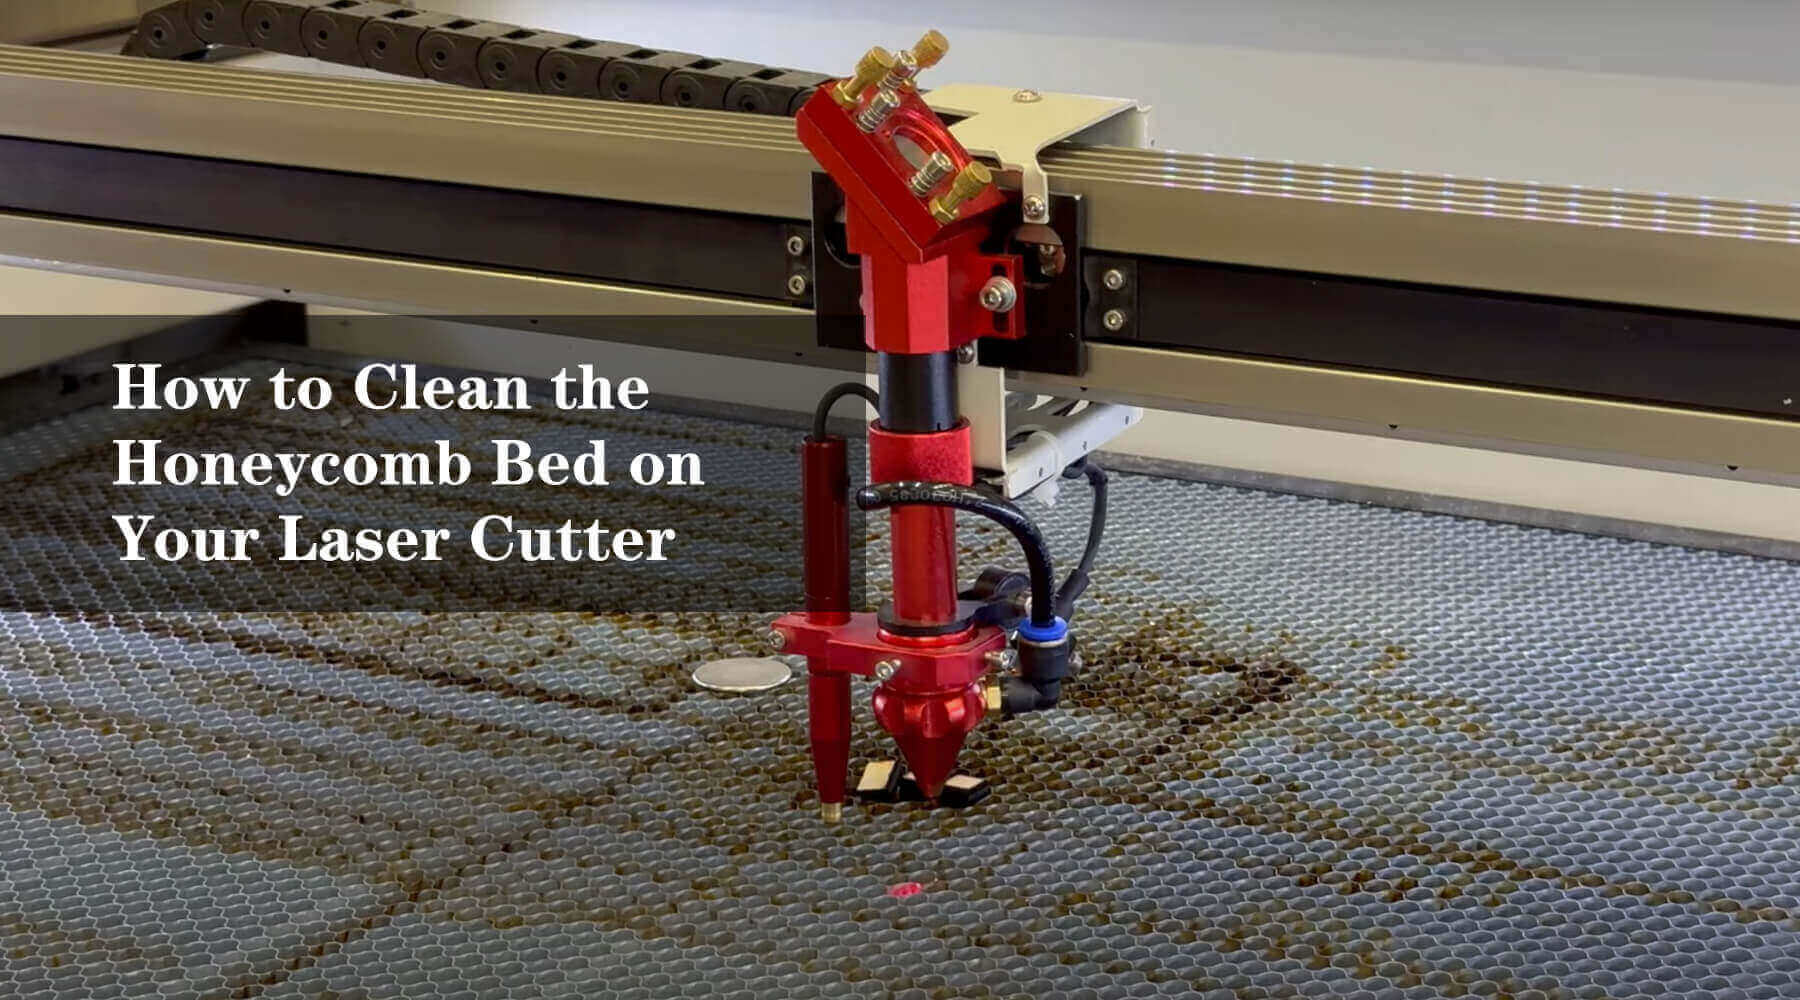 How do you clean the honeycomb bed on your laser?